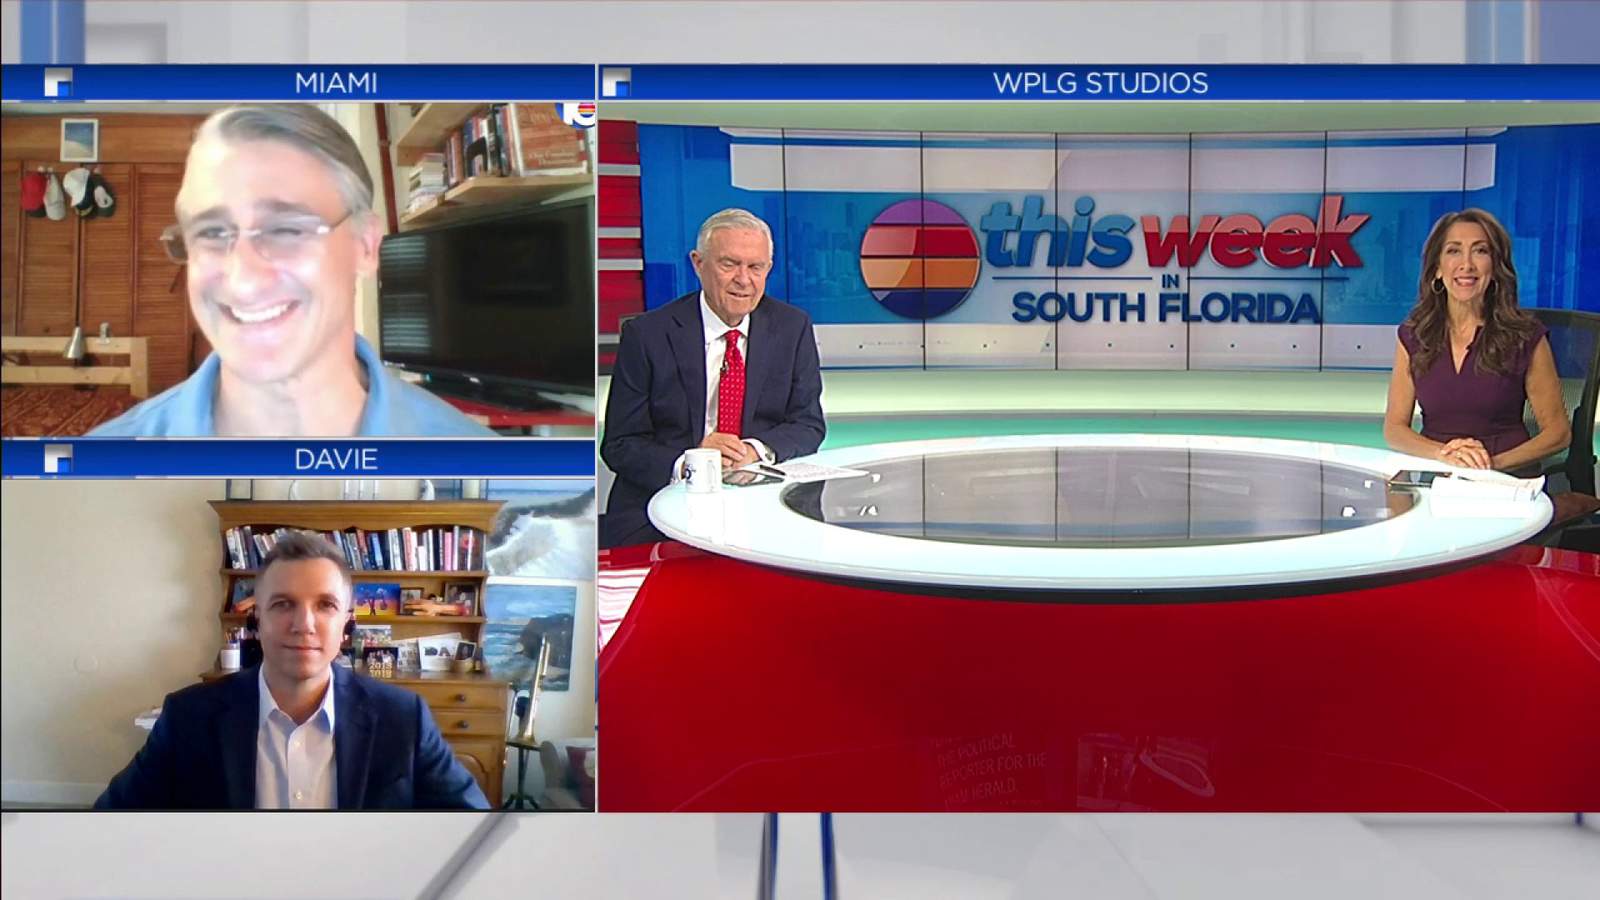 This Week in South Florida: Marc Caputo and David Smiley